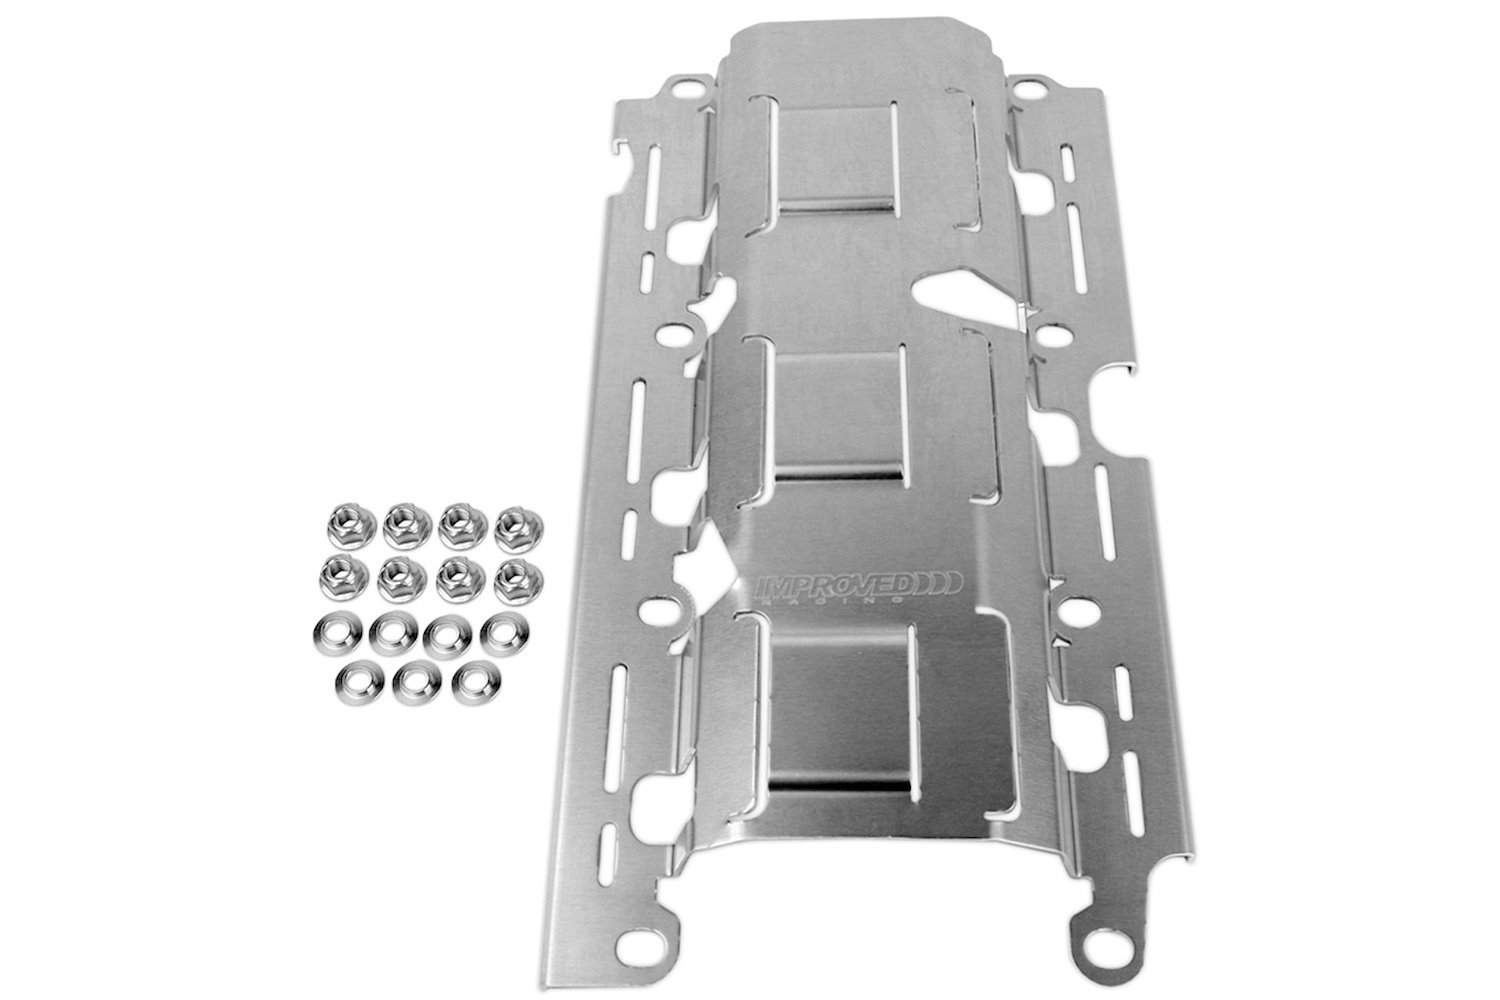 EGM-243 Performance Windage Tray For up to 4 in. Stroke GM LS Engines, Front Clearance Pans